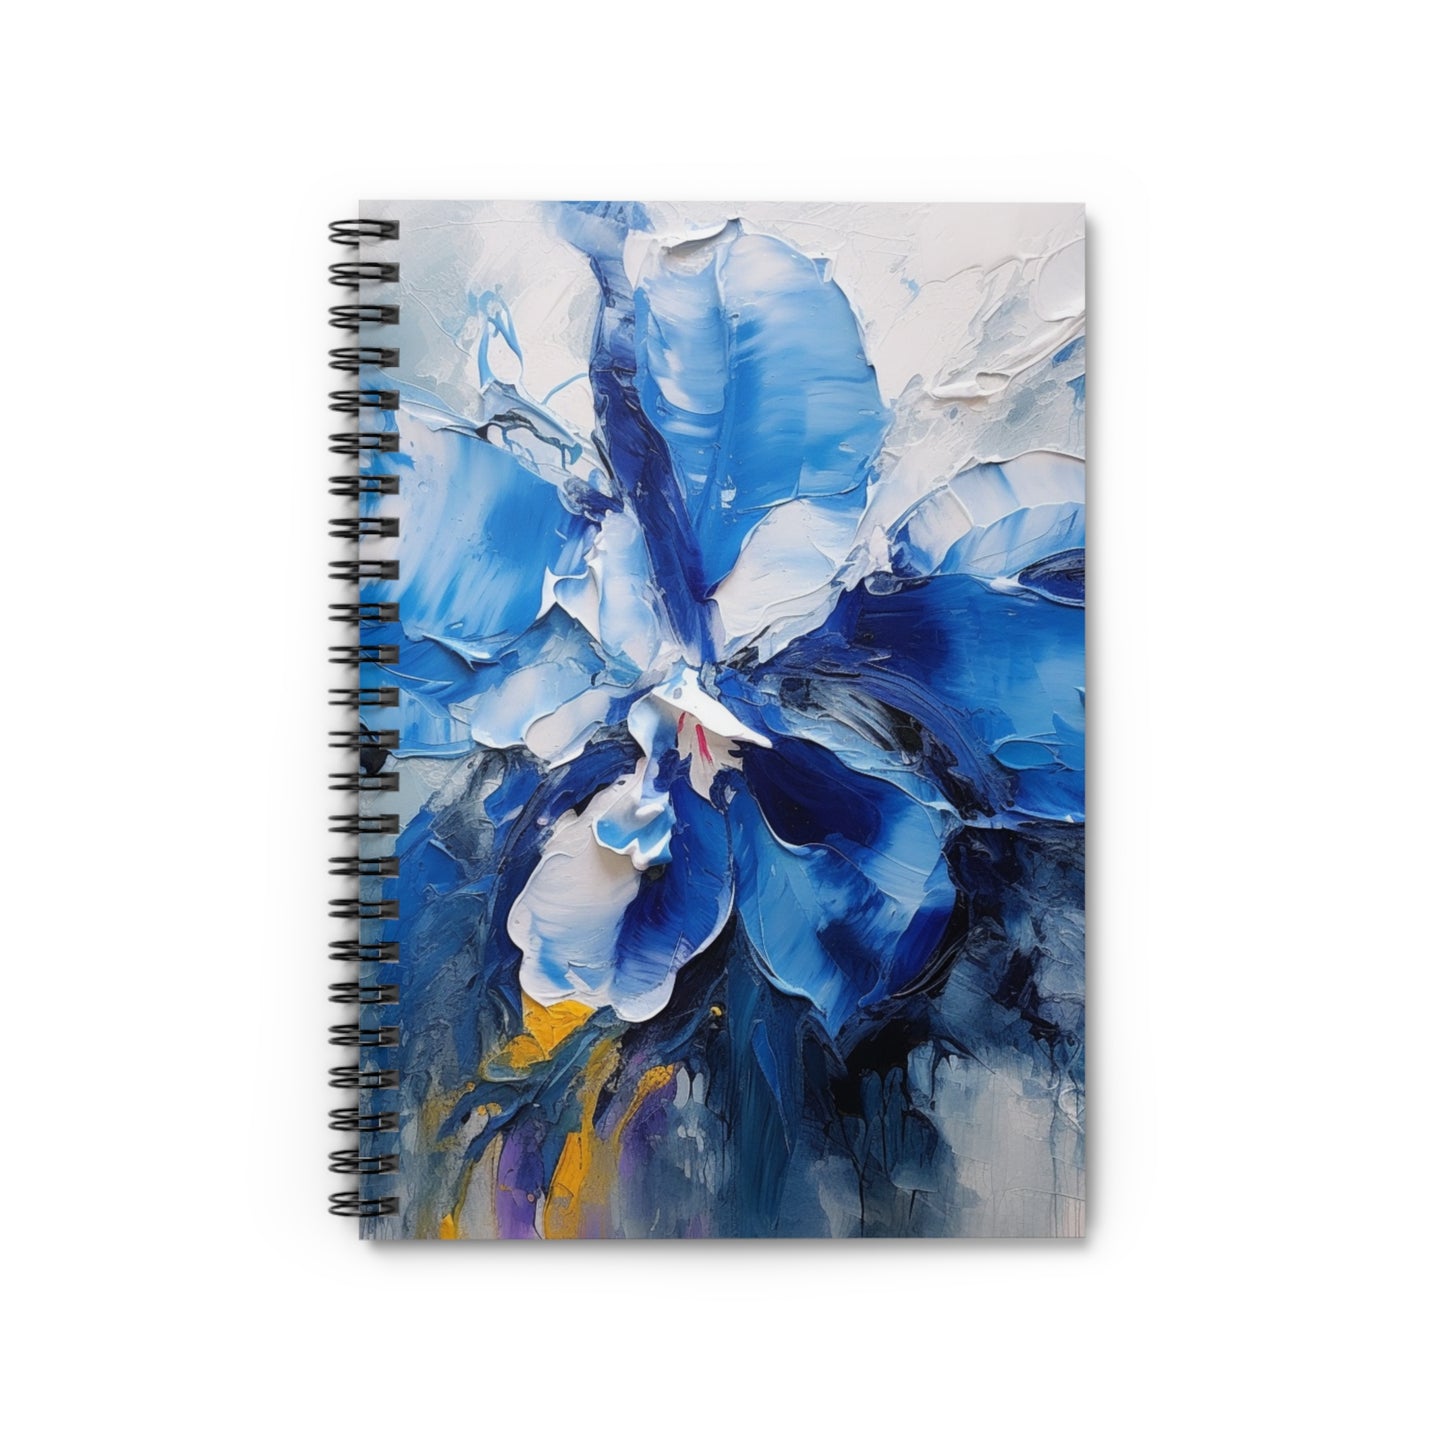 Spiral Notebook Ruled with Blue Orchid Drawing: A Delicate Tribute to Nature's Splendor